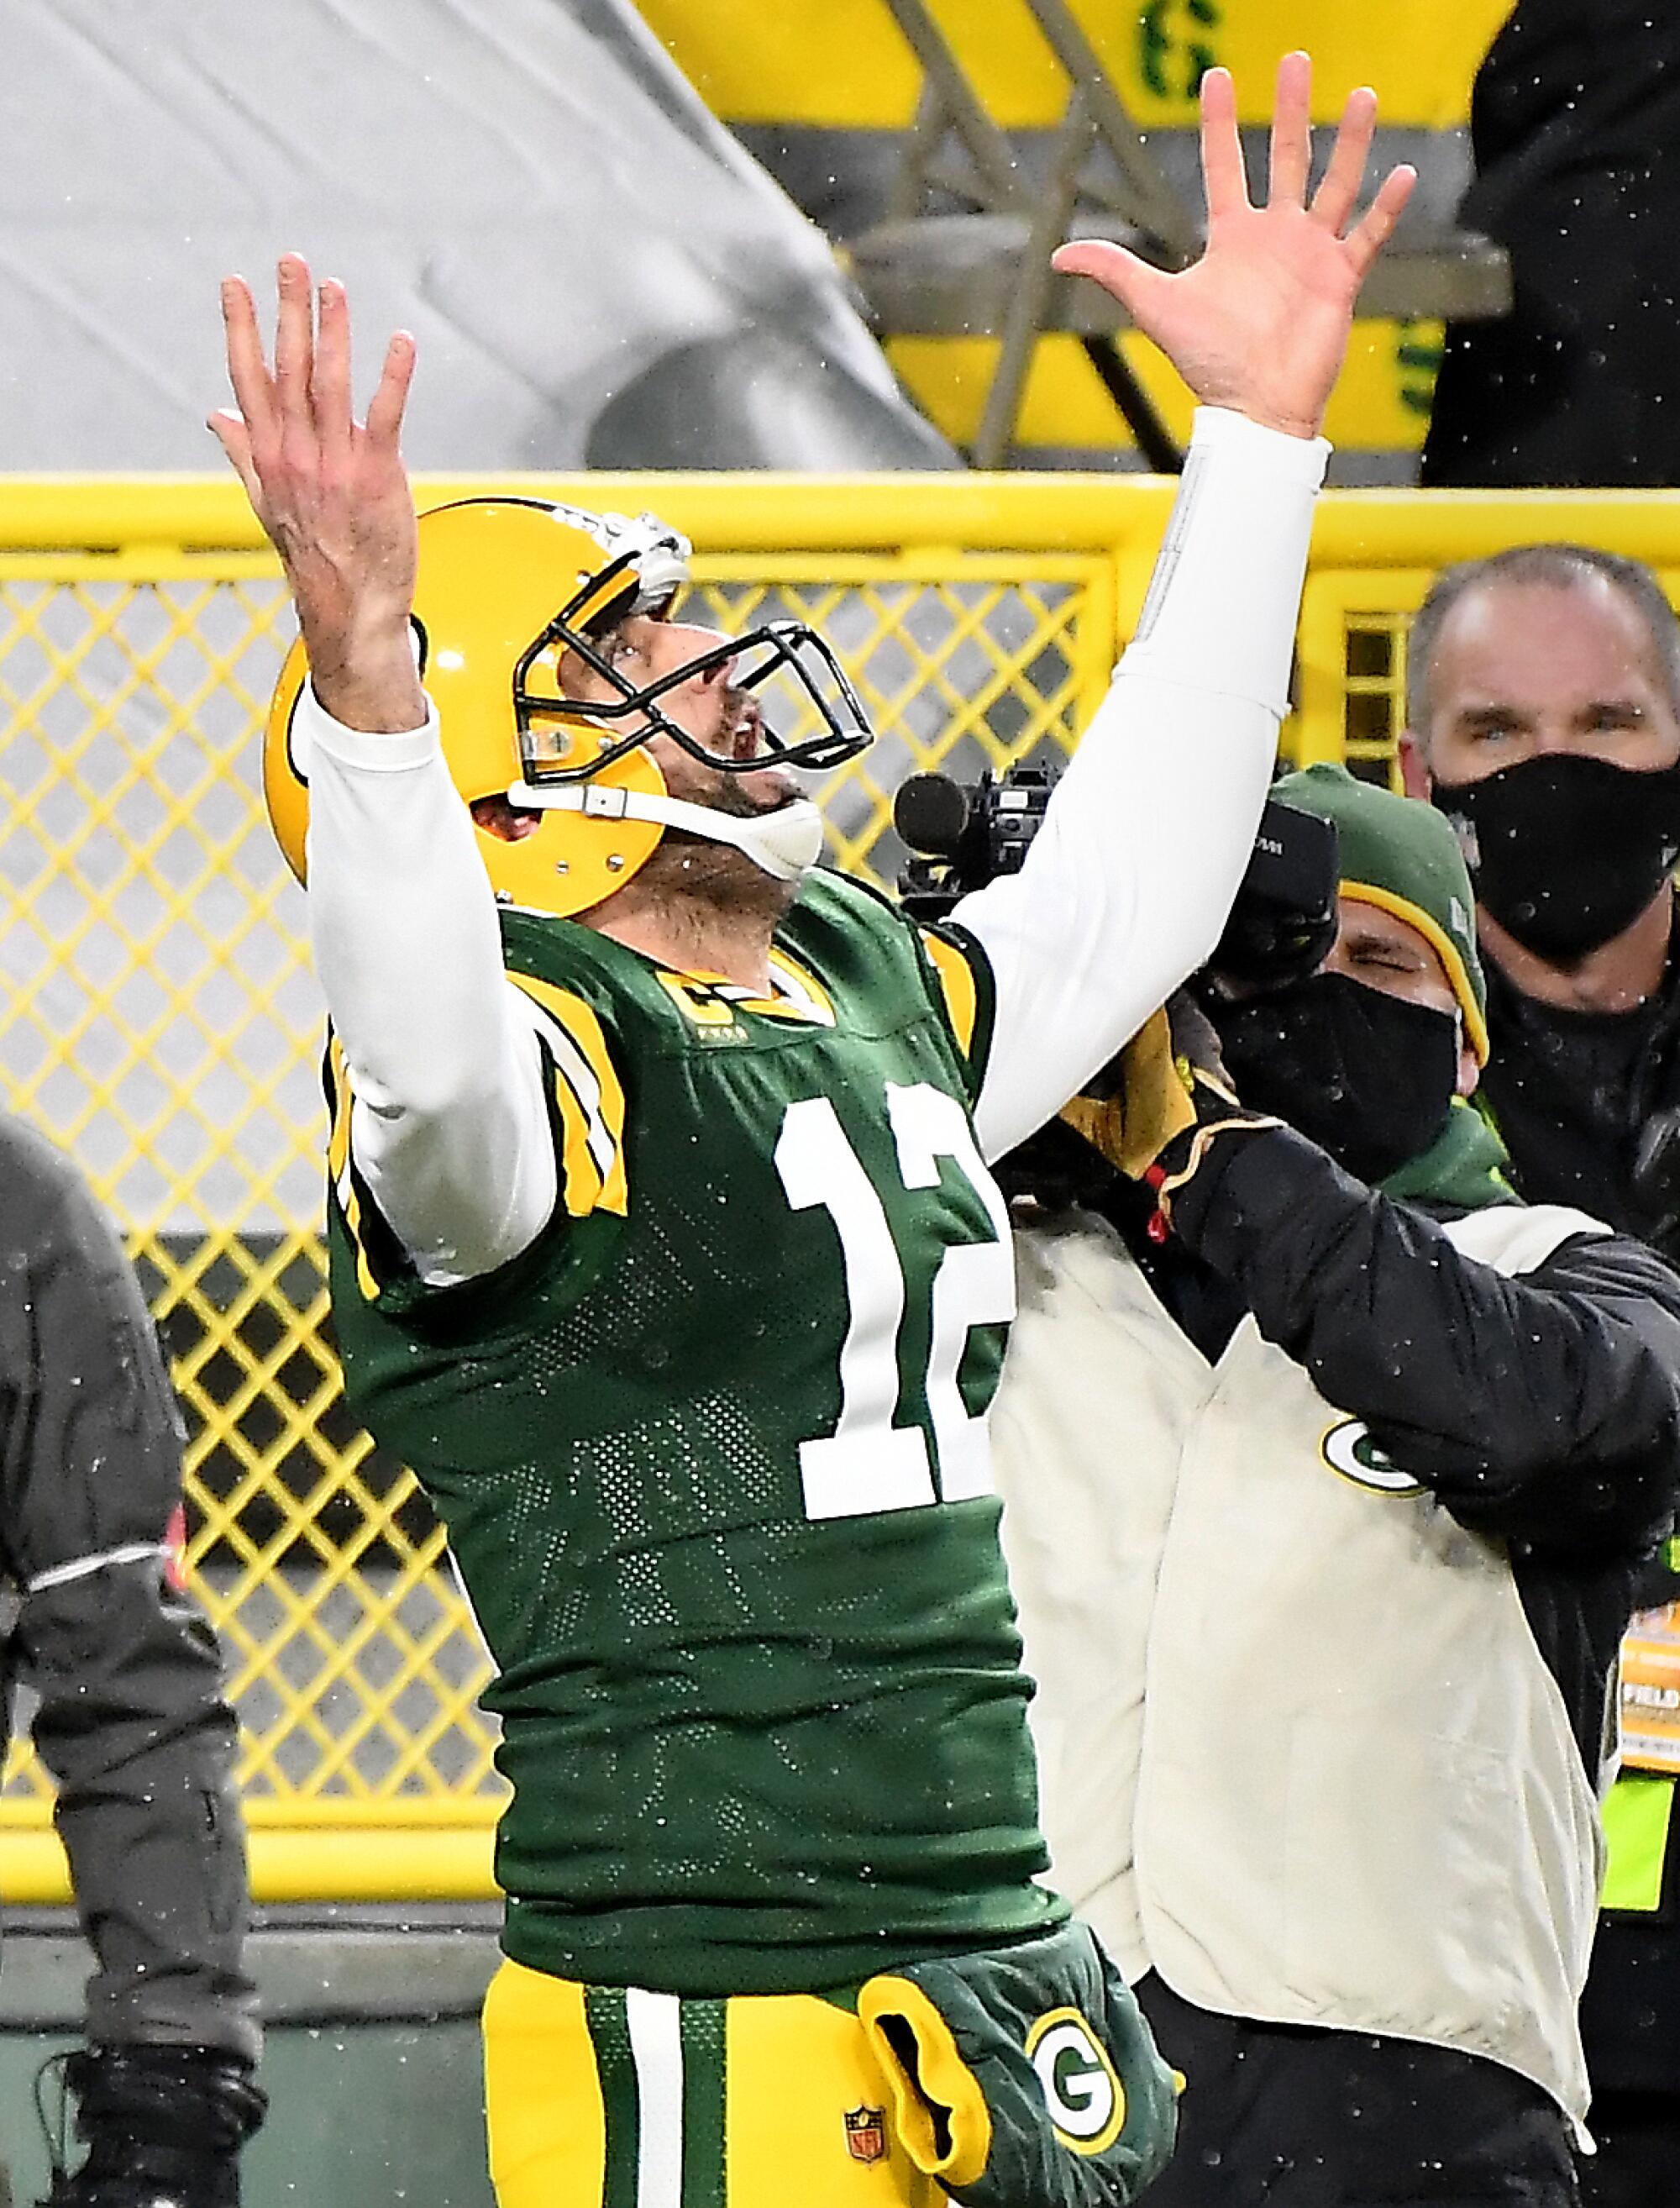 Green Bay Packers quarterback Aaron Rodgers celebrates after scoring a touchdown in the second quarter.